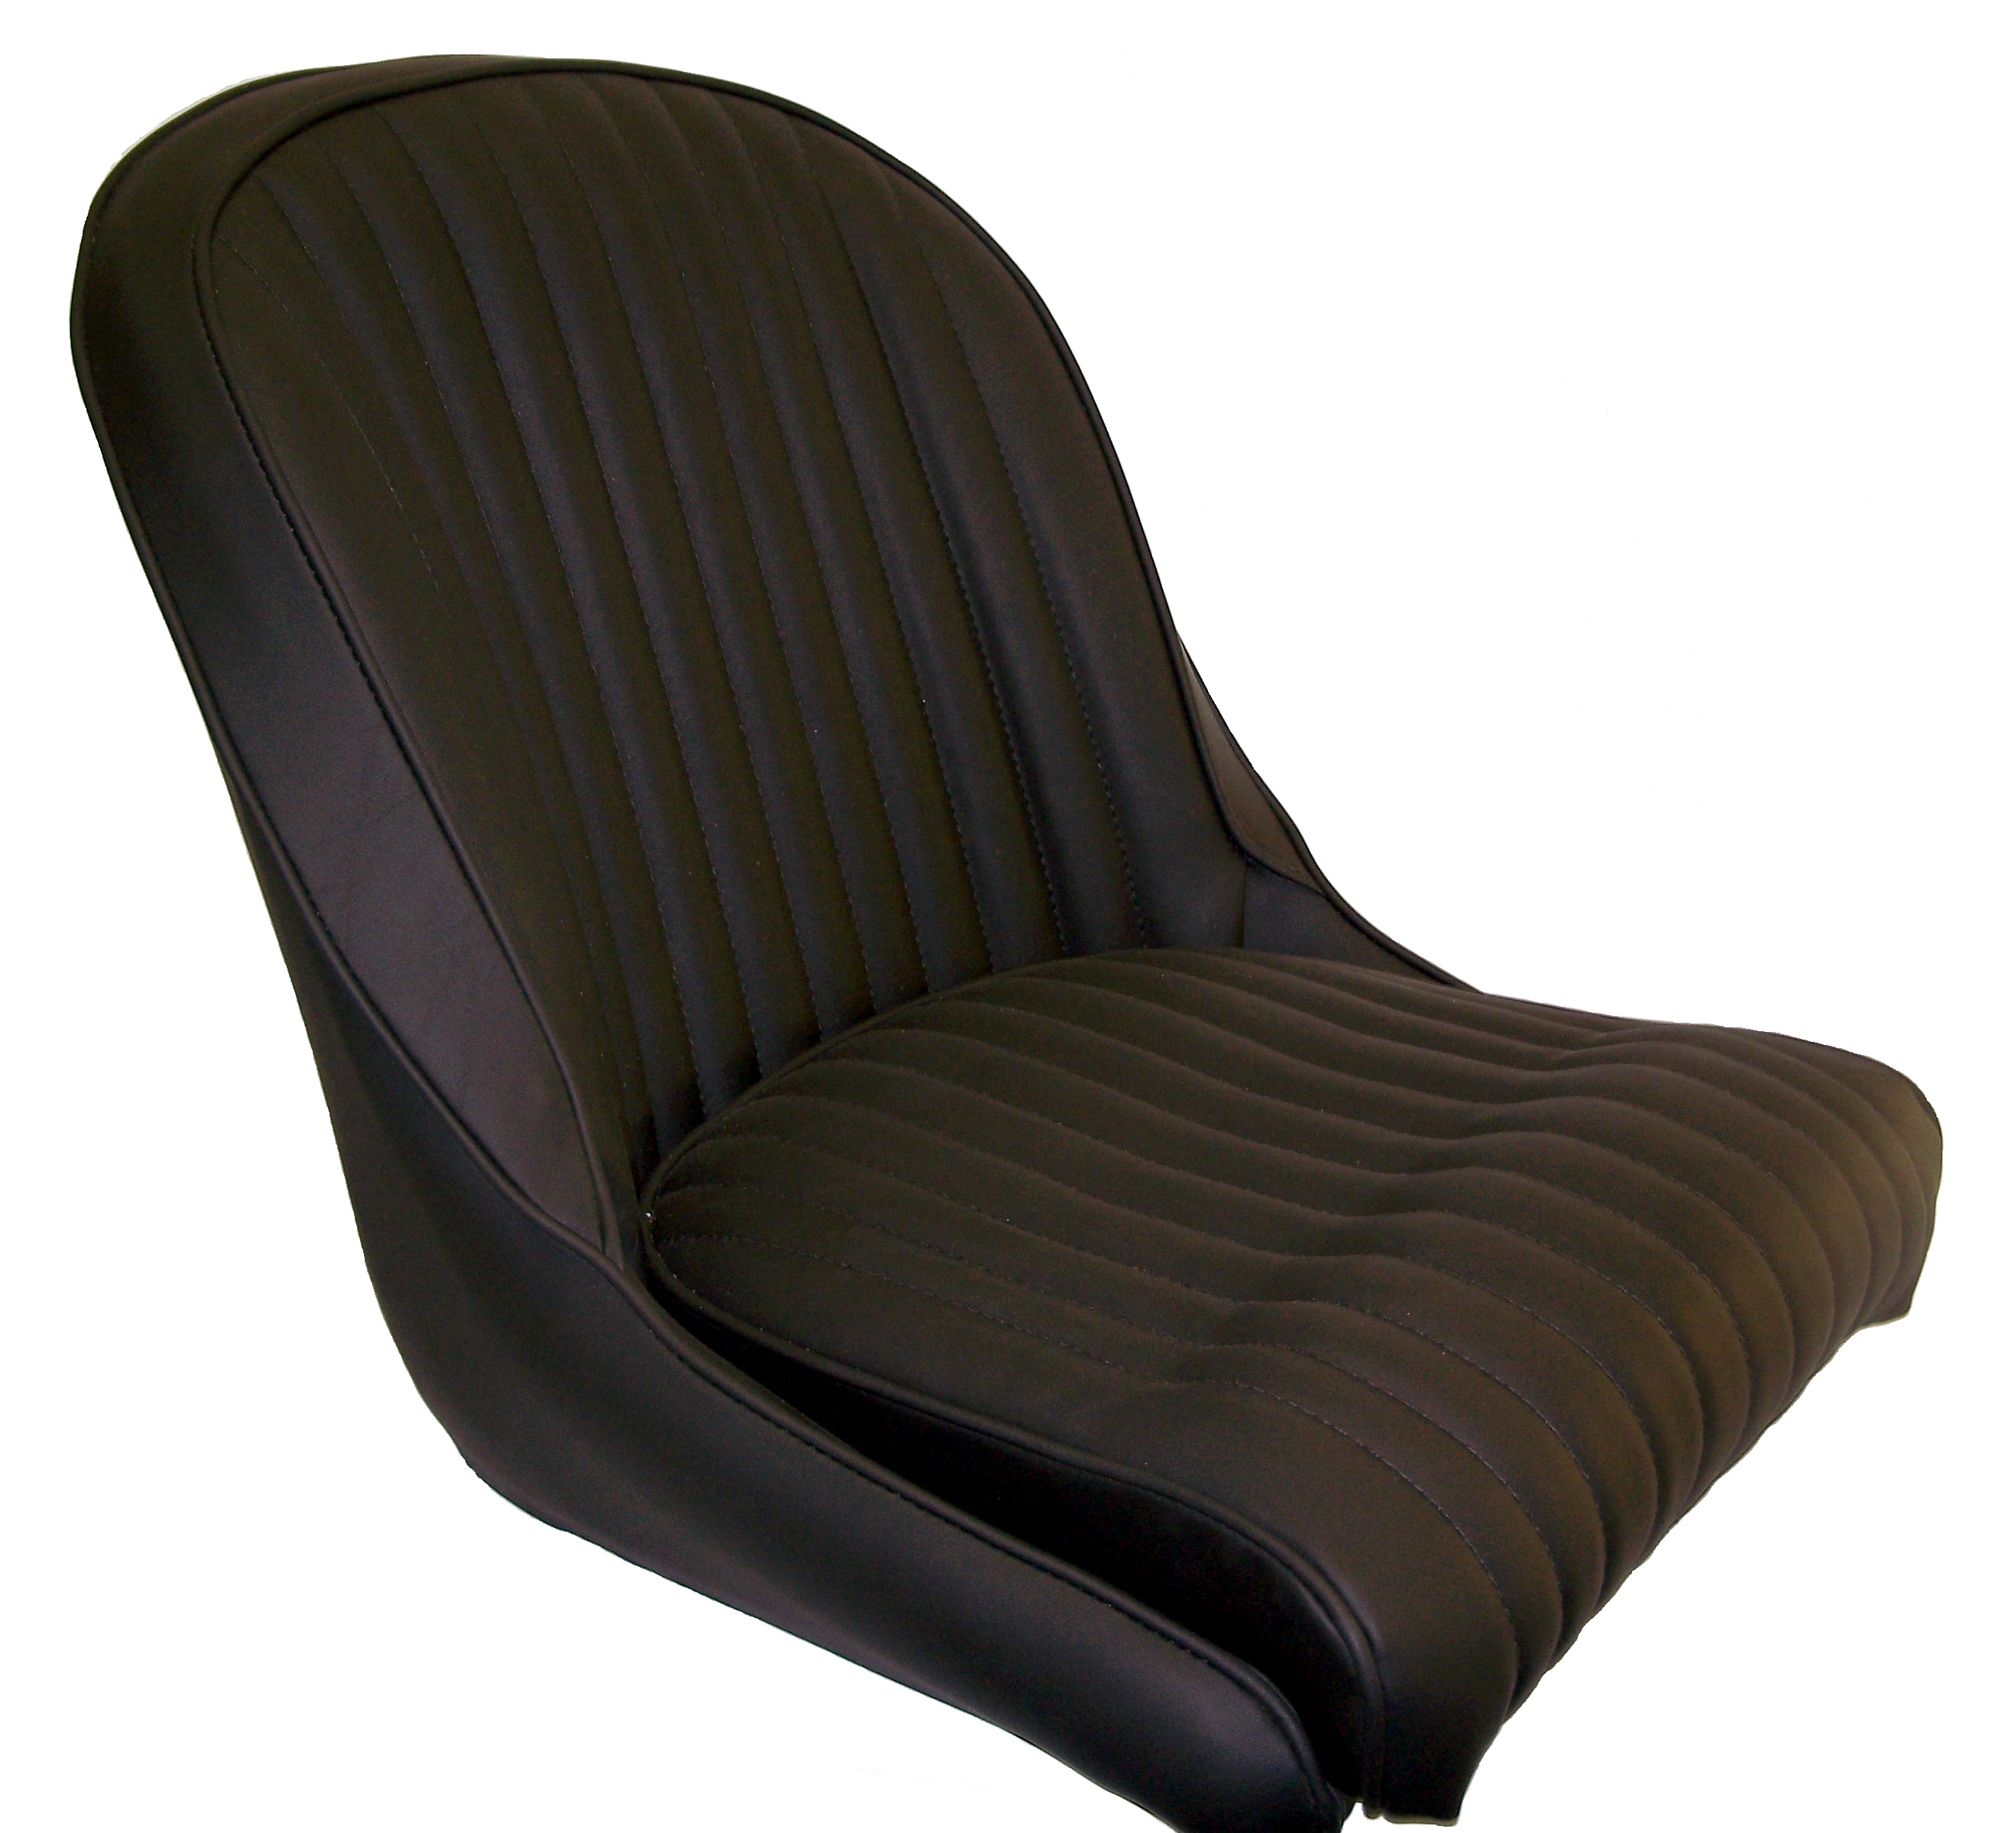 seat upholstered vinyl each sold as pair only